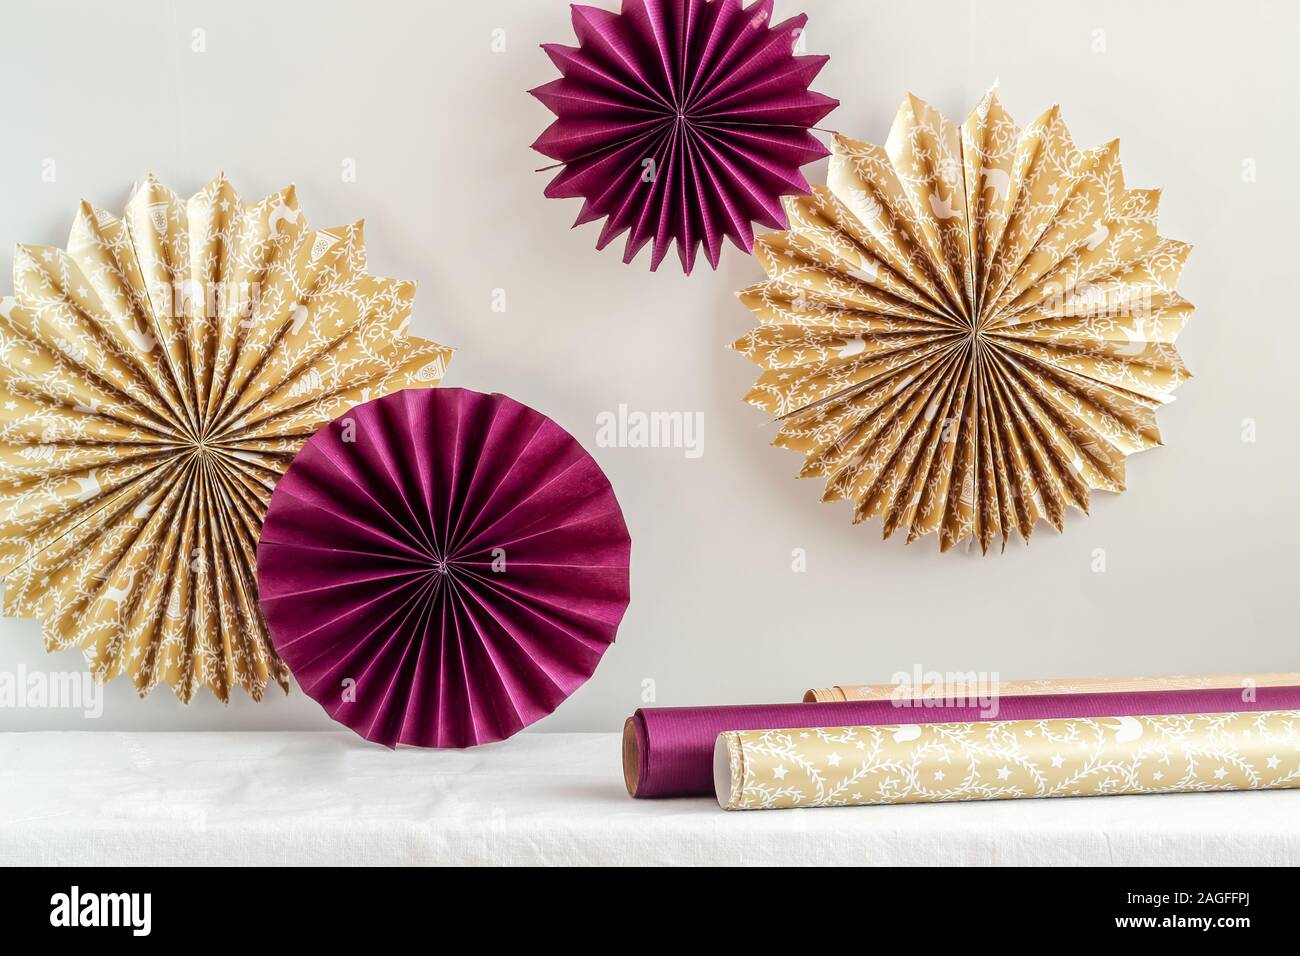 World wide dynamic State Simple DIY paper stars/snowflakes hanging on a wall. Party decorations  Stock Photo - Alamy